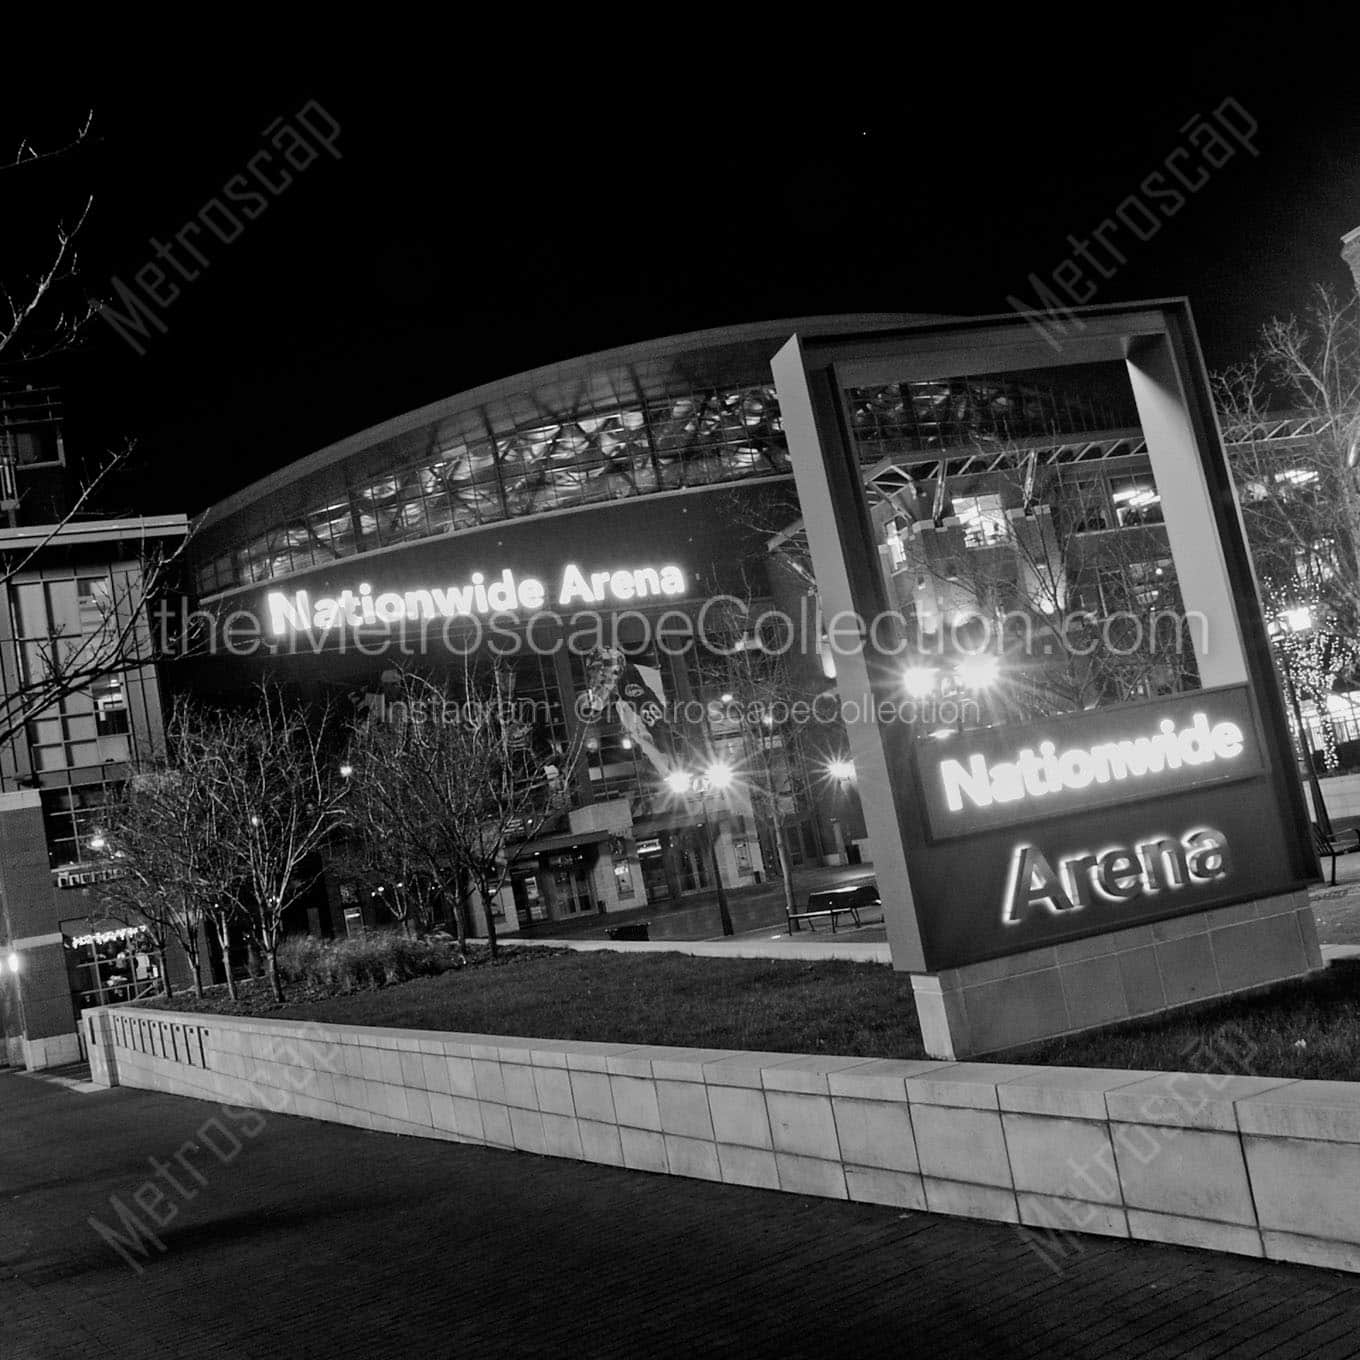 nationwide arena at night Black & White Office Art